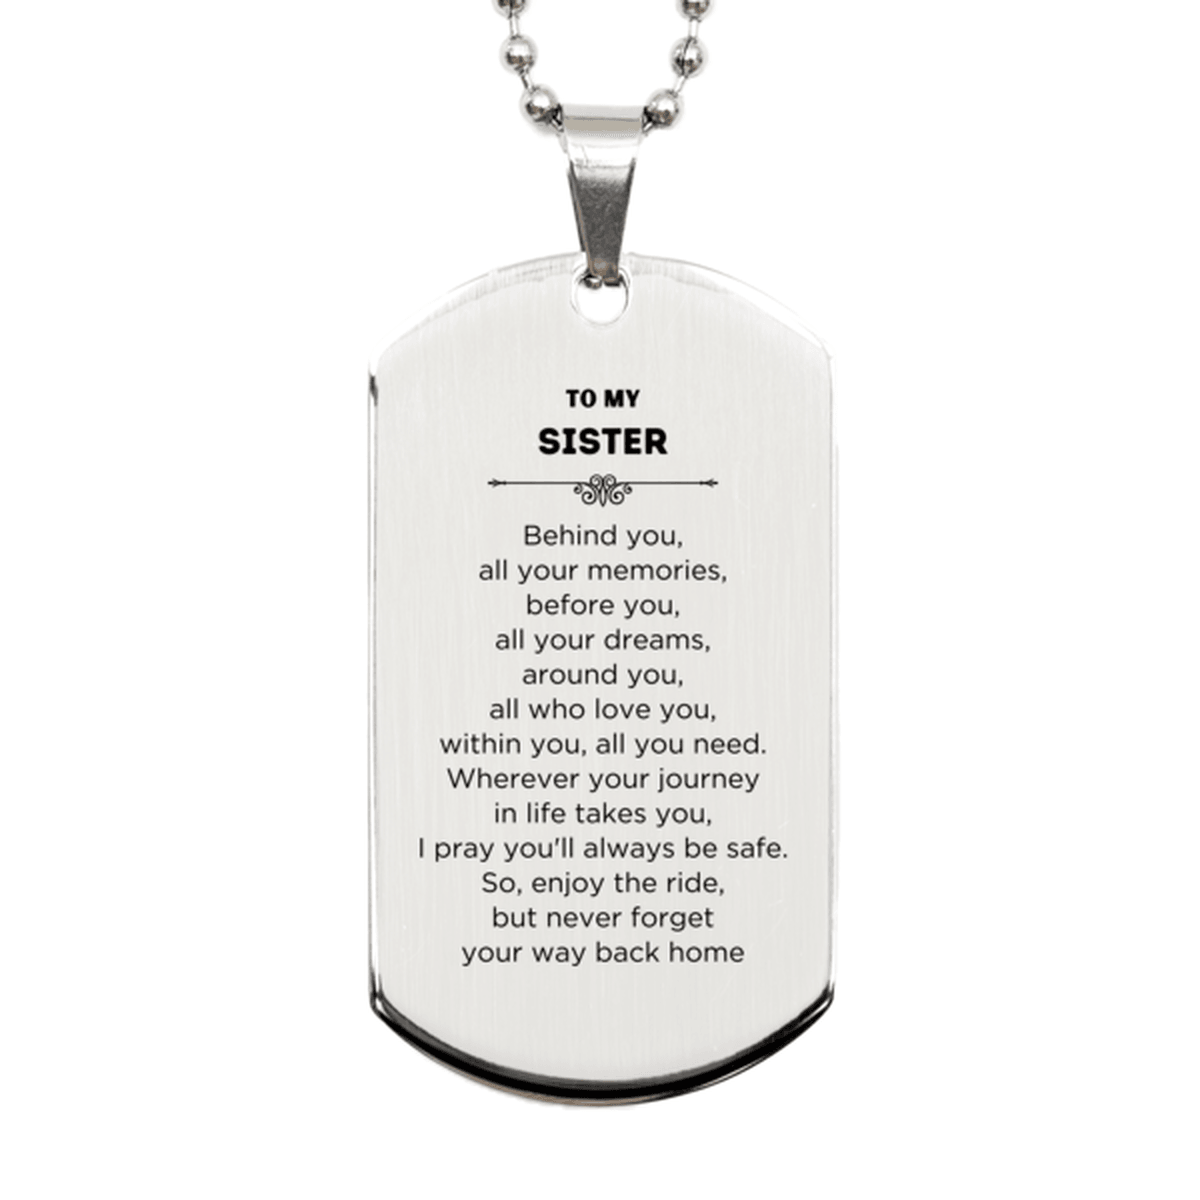 Sister Silver Dog Tag Necklace Birthday Christmas Unique Gifts Behind you, all your memories, before you, all your dreams - Mallard Moon Gift Shop